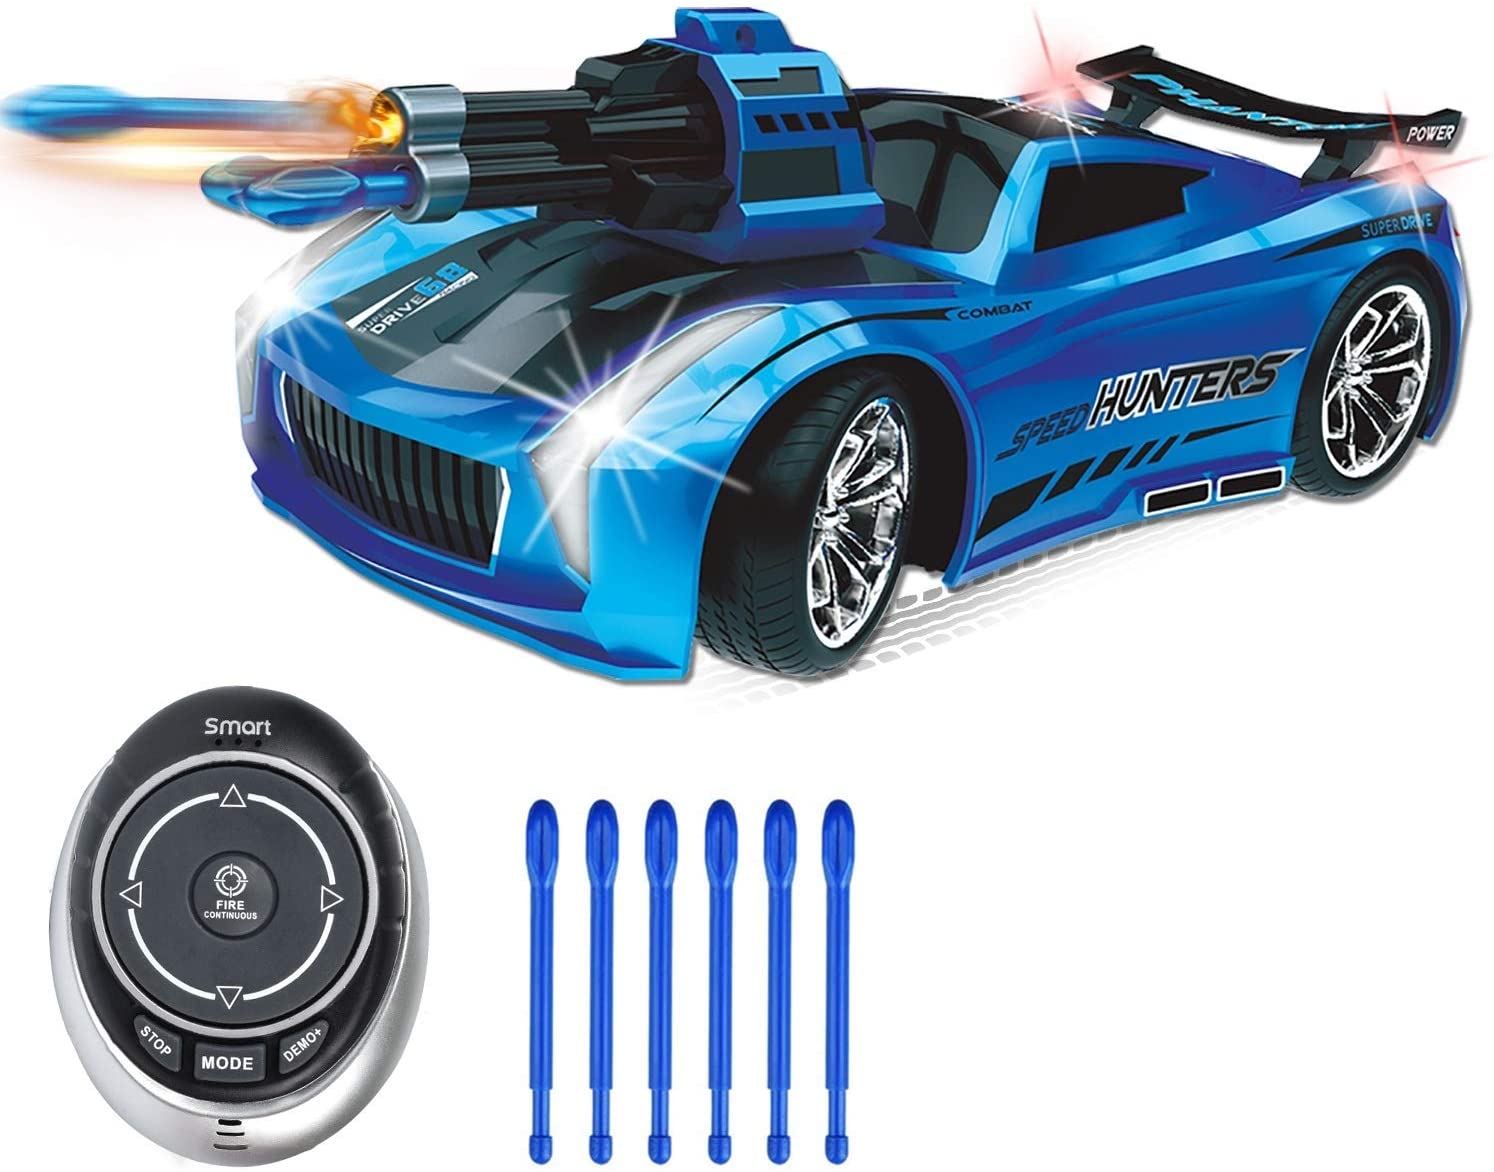 ''Seckton Smart Voice REMOTE CONTROL CARs, Best Birthday Gifts for Boys Age 6 Up, 2.4GHz Fast Race St